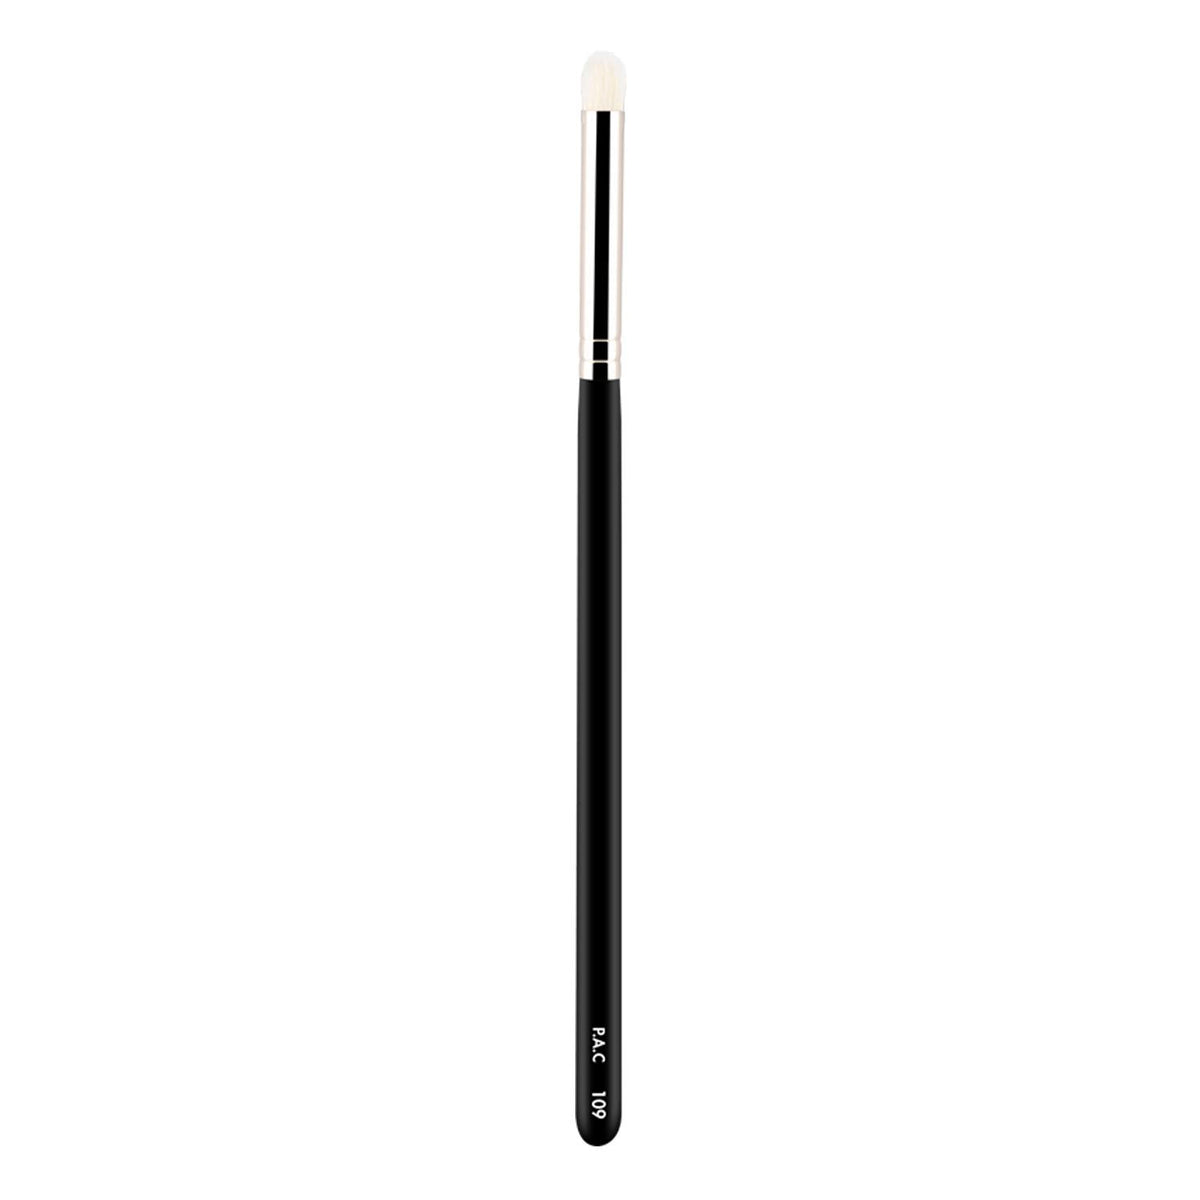 PAC Concealer Brush 109 PAC